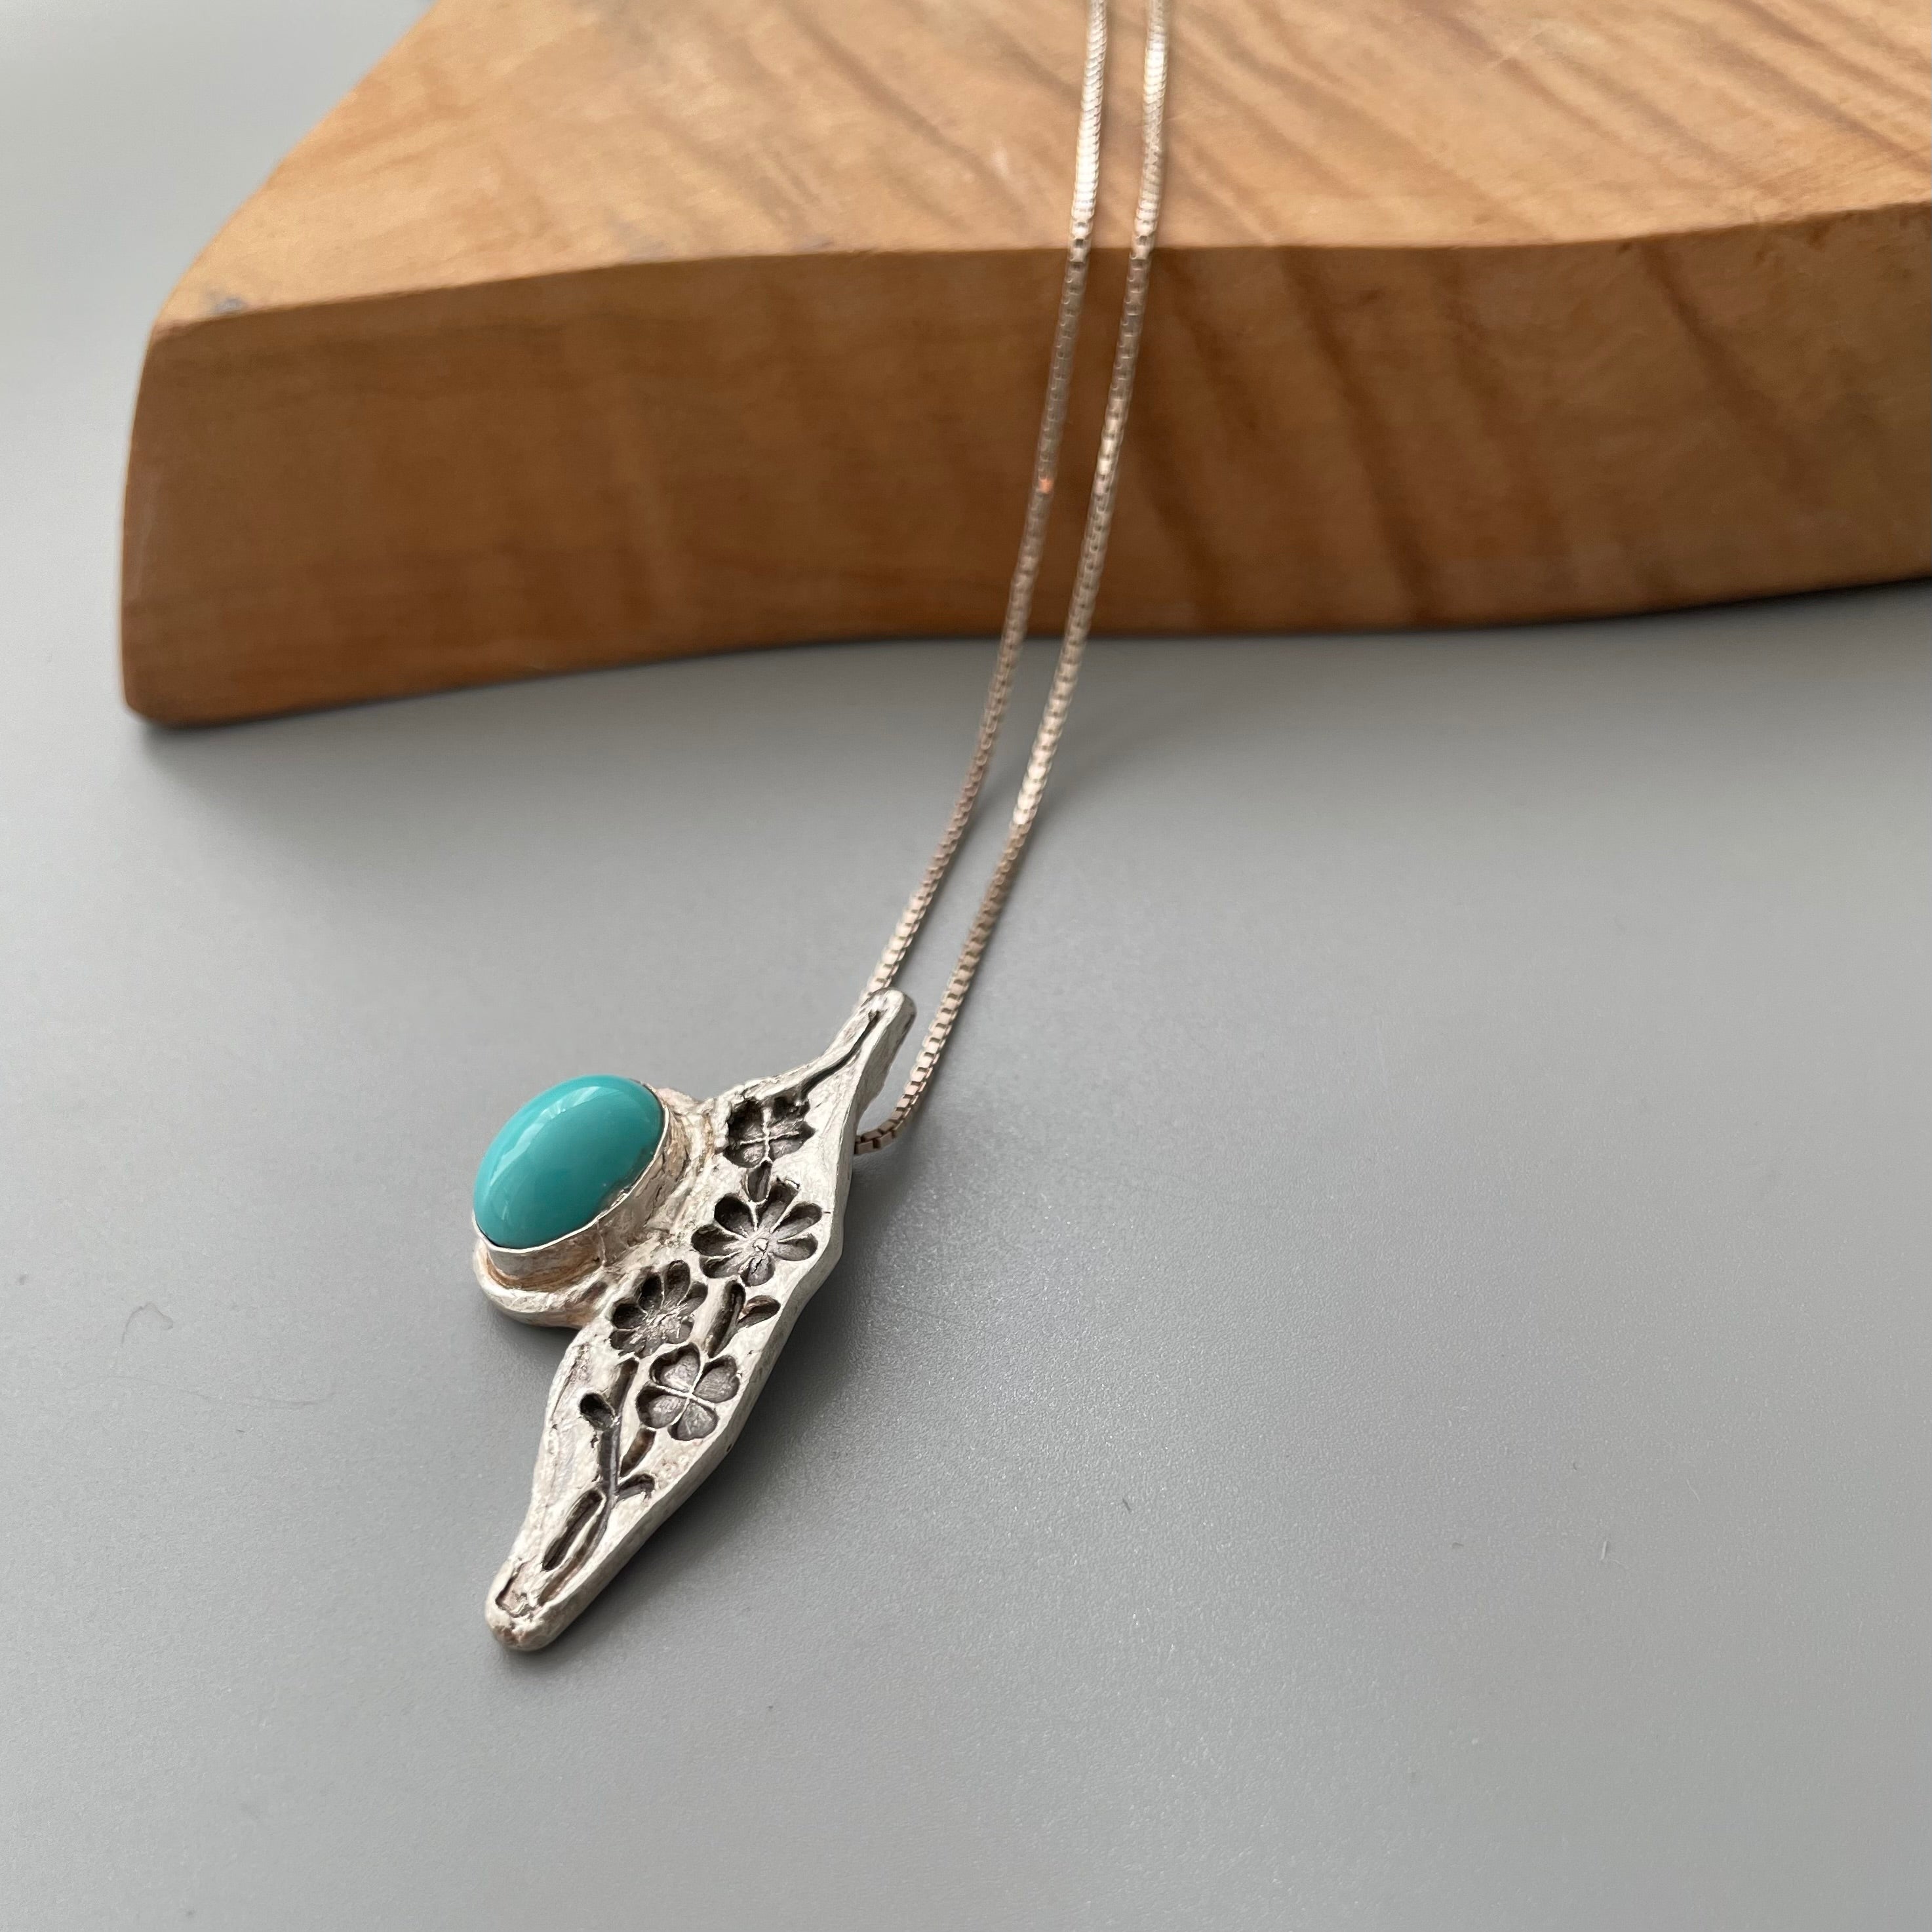 Persian Necklace-Handmade Silver Necklace with Engraving and Turquoises:Persian Jewelry-AFRA ART GALLERY